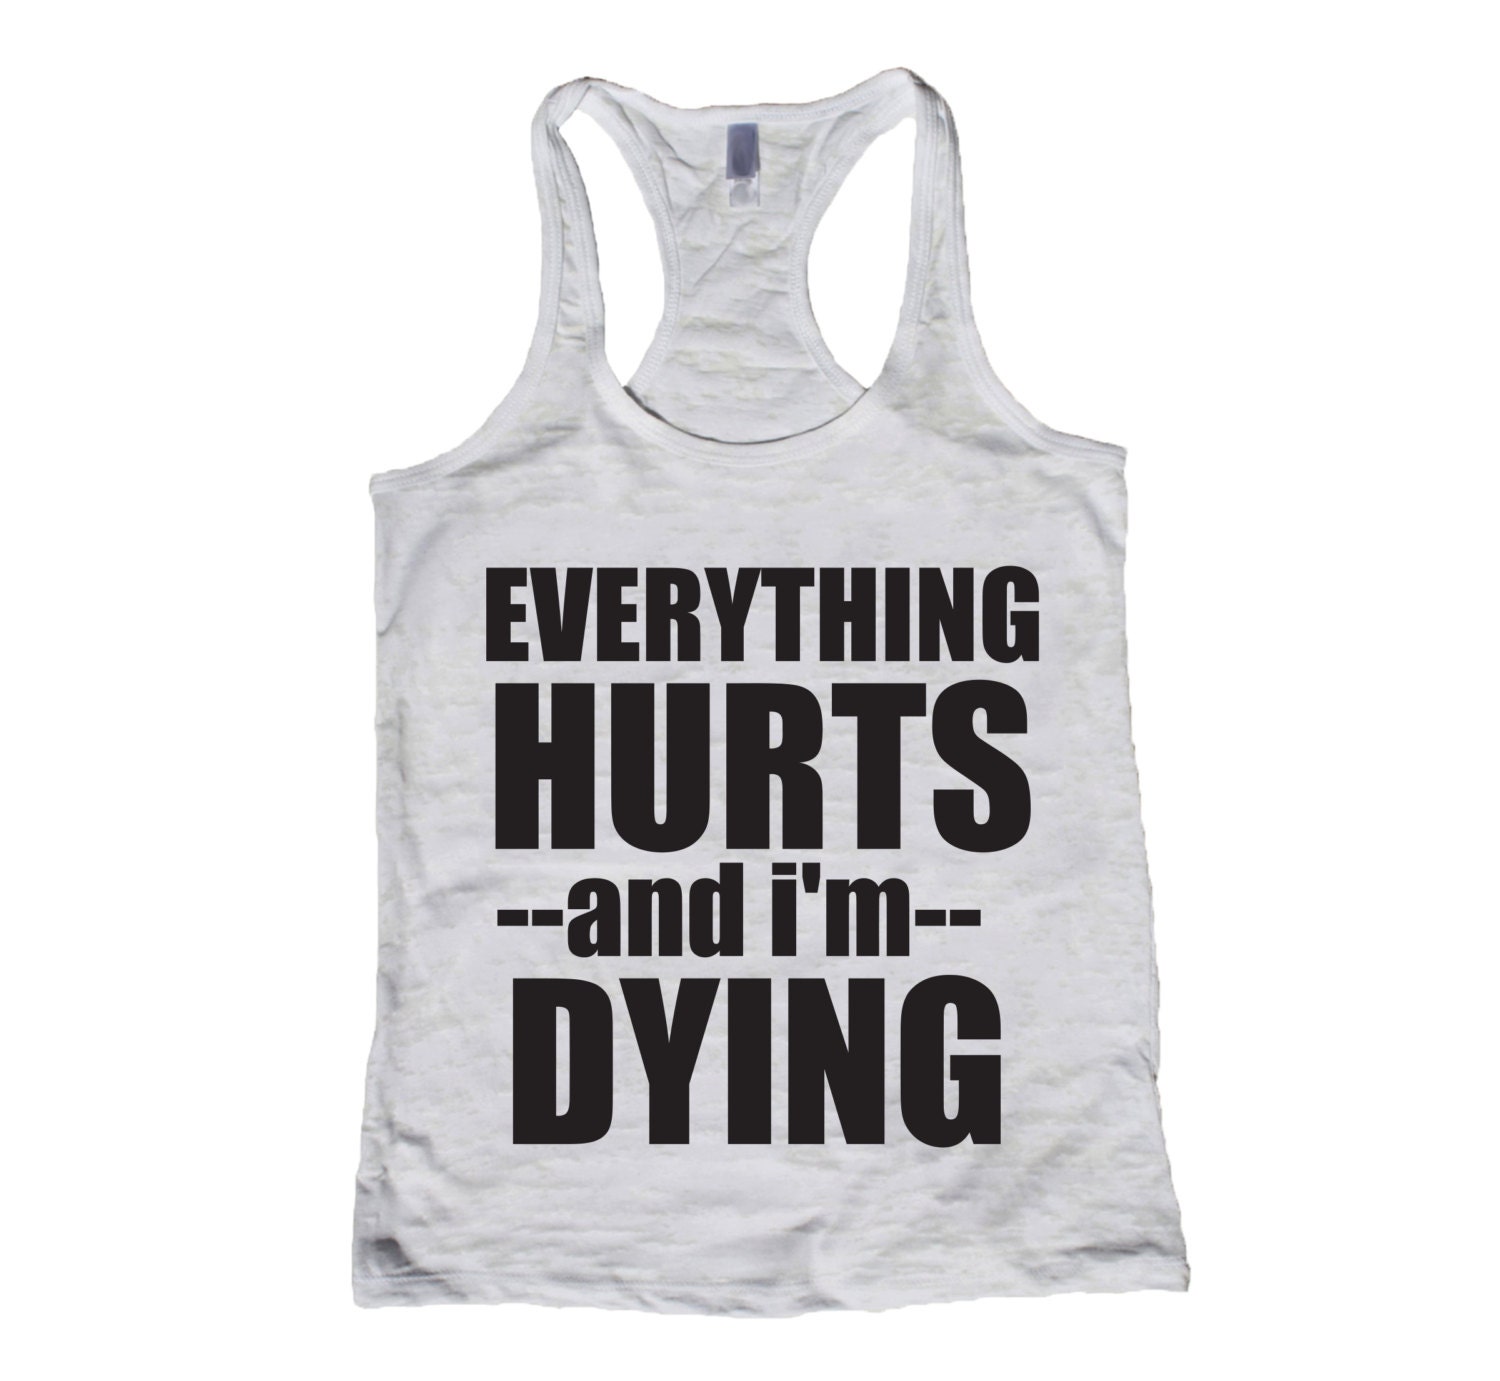 Everything Hurts And I'm Dying. Workout Tank. by bridescrew